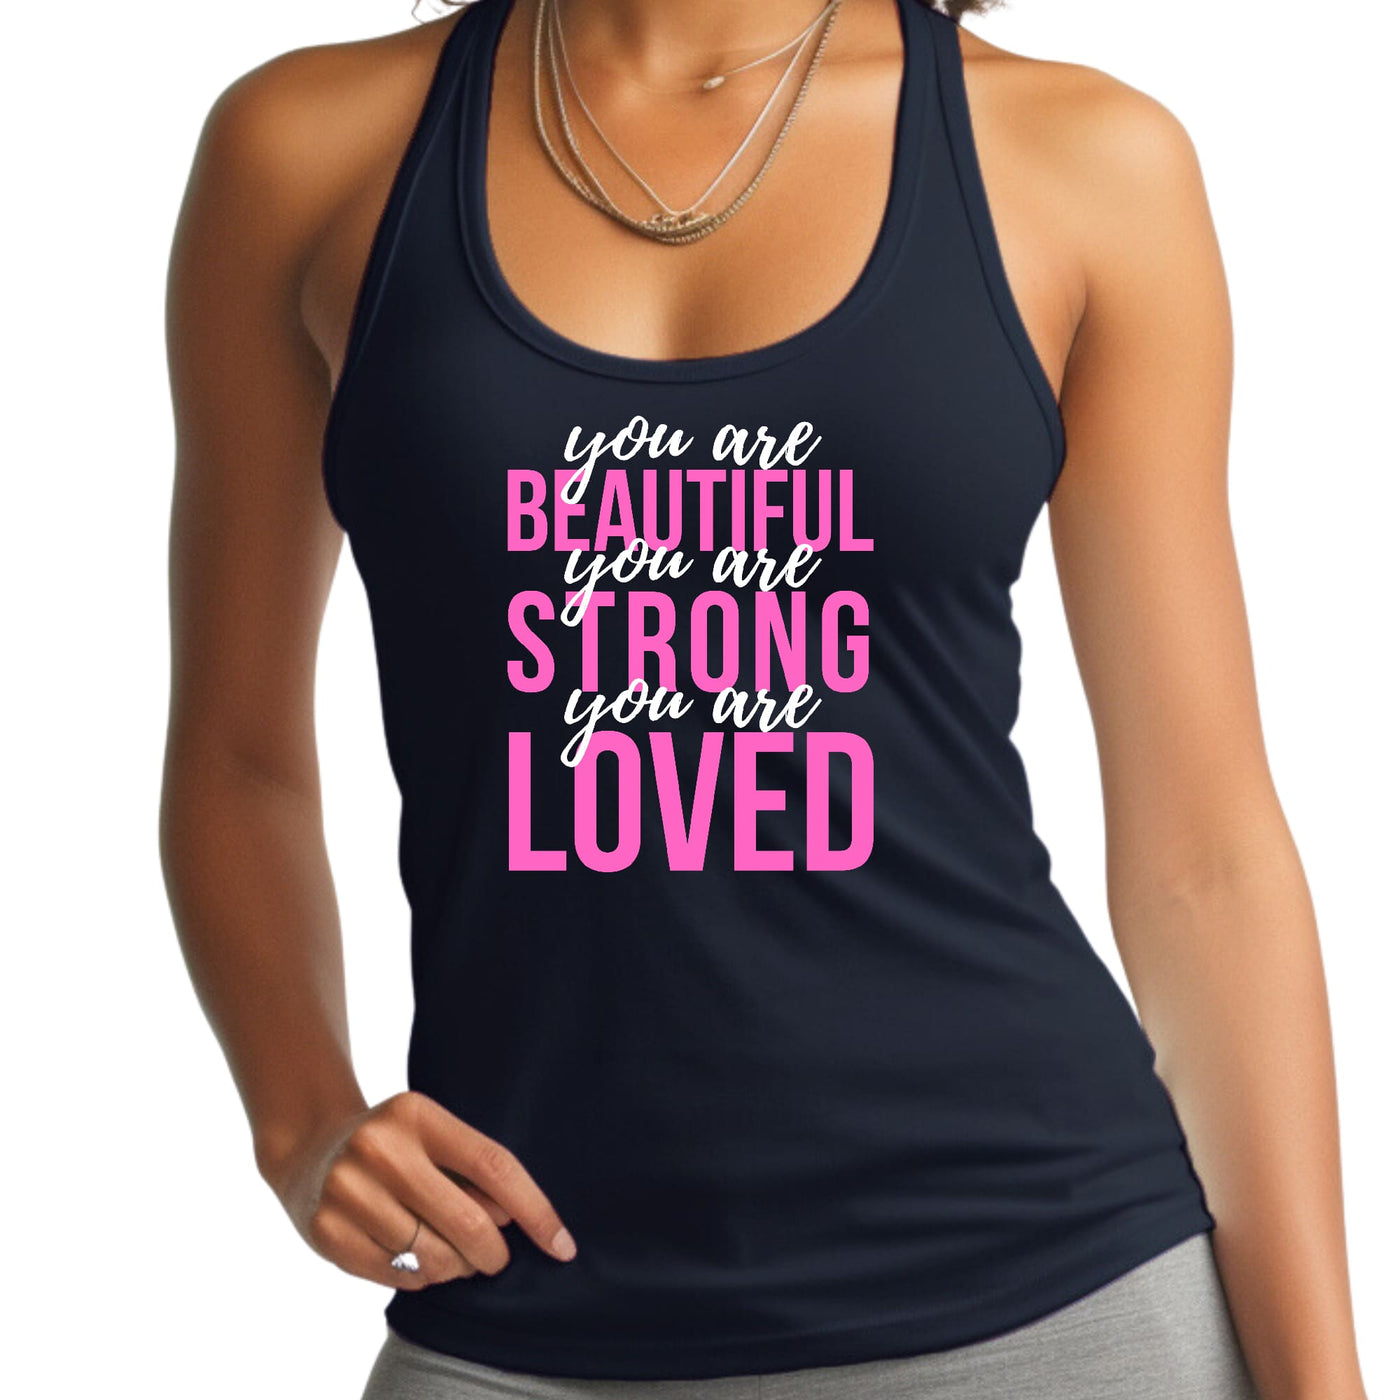 Womens Tank Top Fitness T - shirt You Are Beautiful Strong Loved - Tops